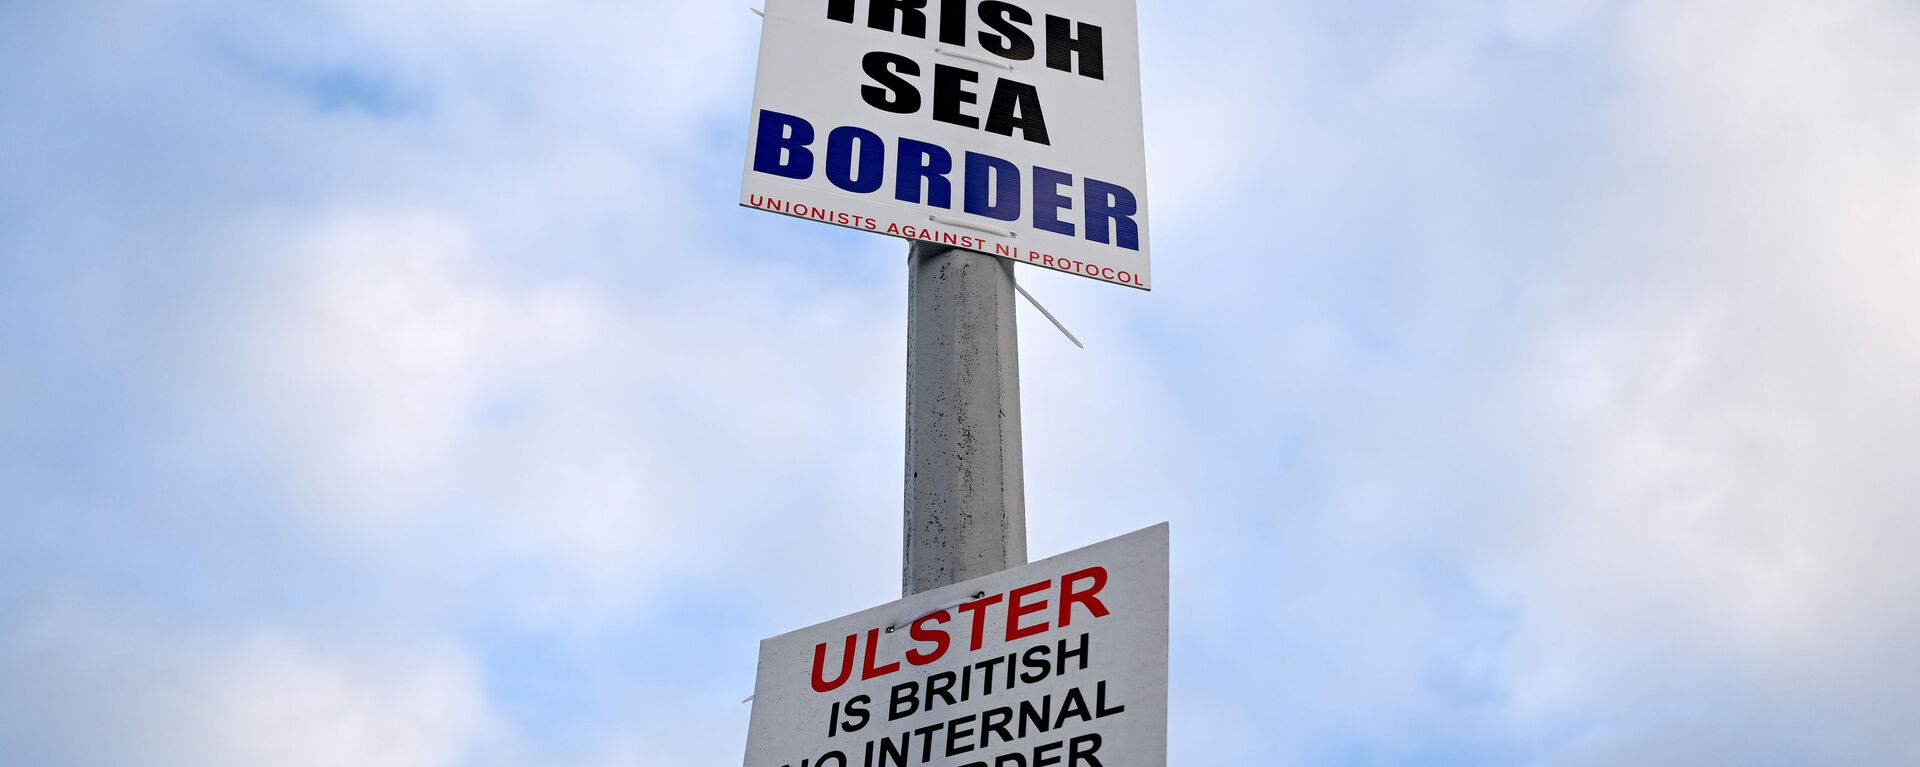 Signs reading 'No Irish Sea border' and 'Ulster is British, no internal UK Border' are seen affixed to a lamp post at the Port of Larne, Northern Ireland, March 6, 2021. Picture taken March 6, 2021 - Sputnik International, 1920, 14.04.2021